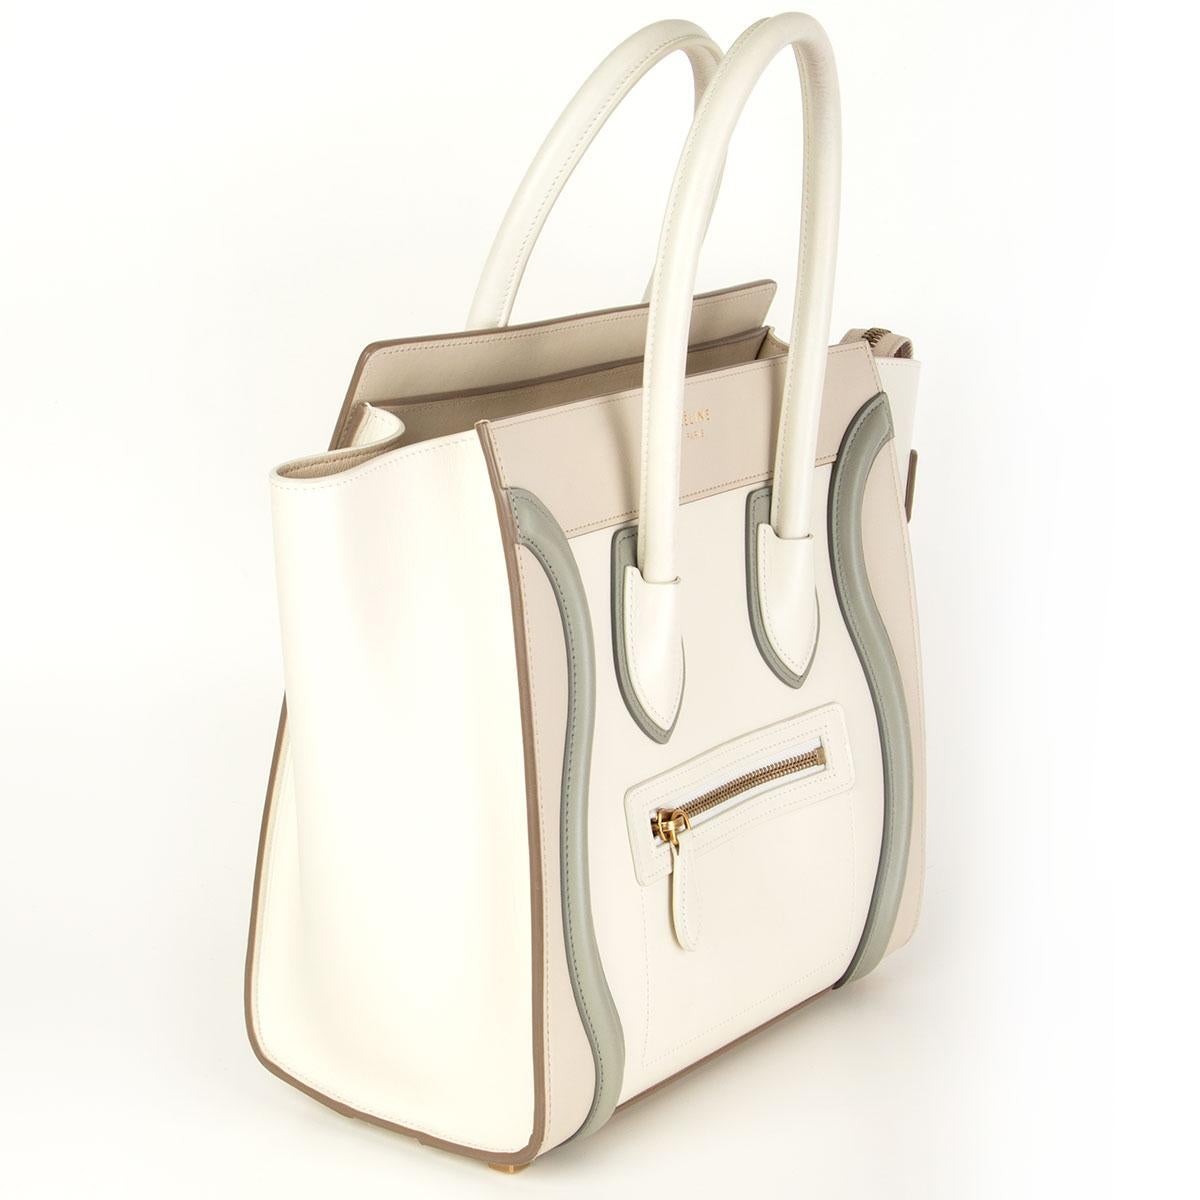 Céline 'Micro Luggage' in off-white, begie and sage grey calfskin. Opens with a zipper on top and is lined in beige calfskin with one zippe pocket against the back and two open pockets against the front. Has been carried with some pen marks on the